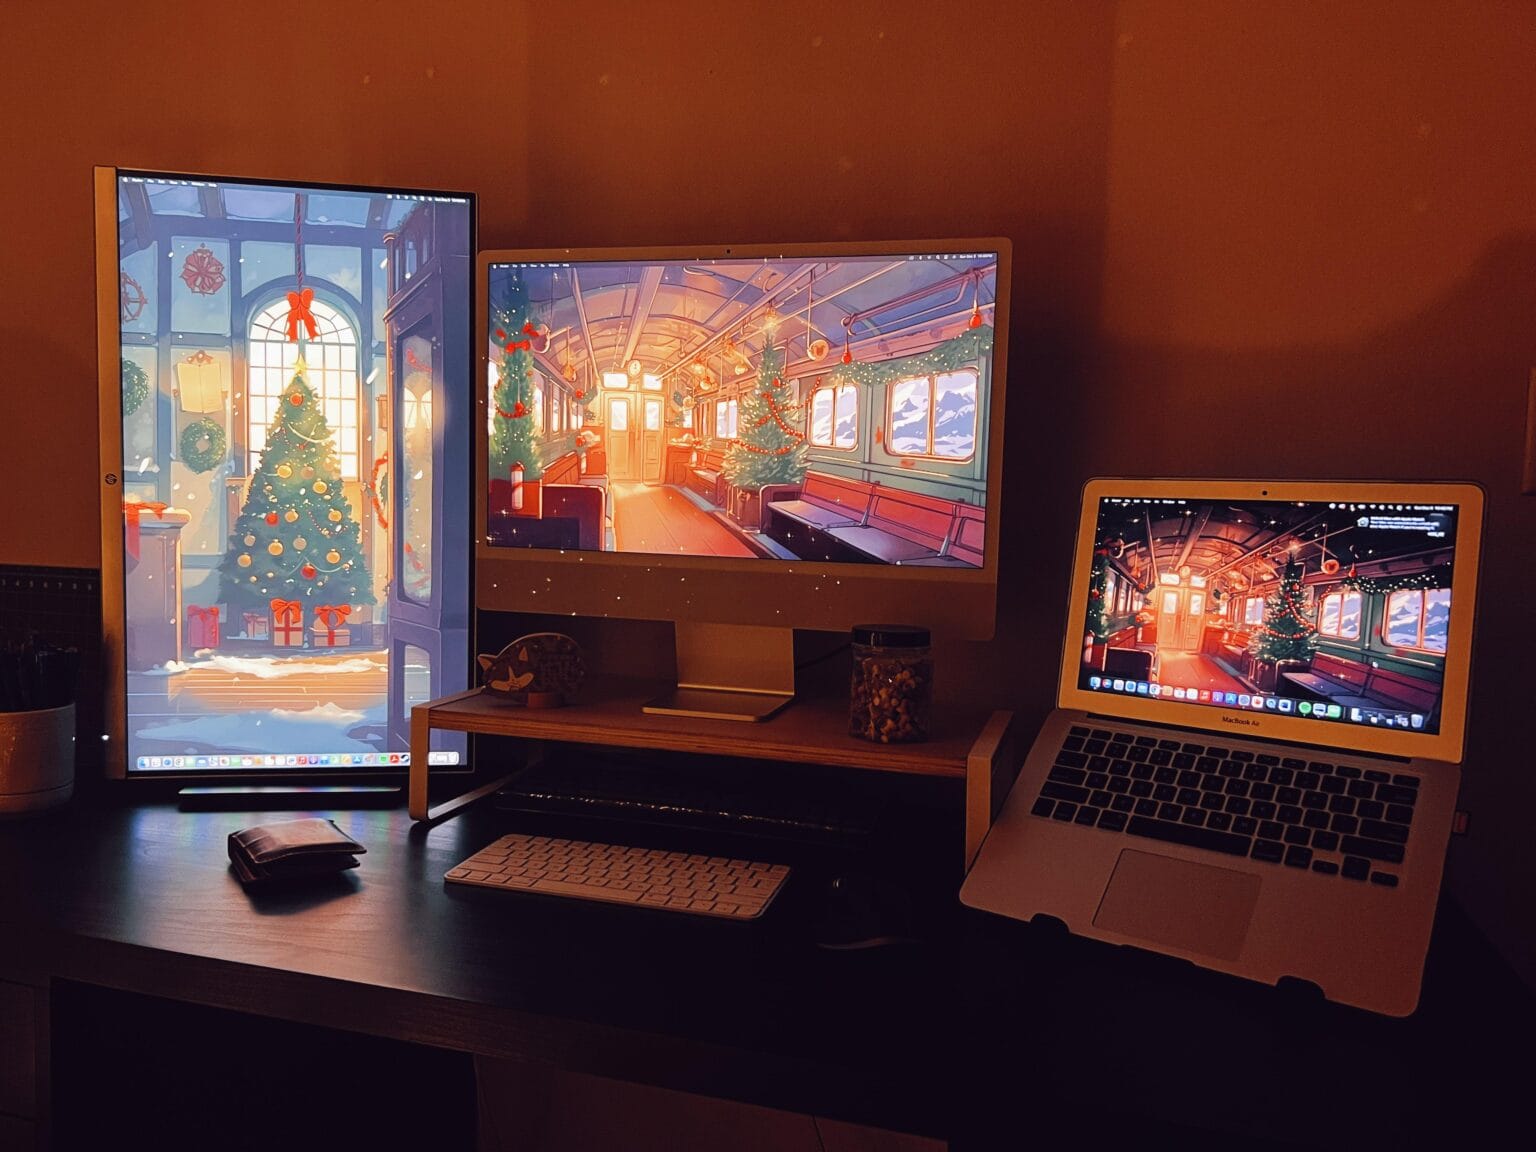 Desktop wallpaper with holiday themes in iMac setup